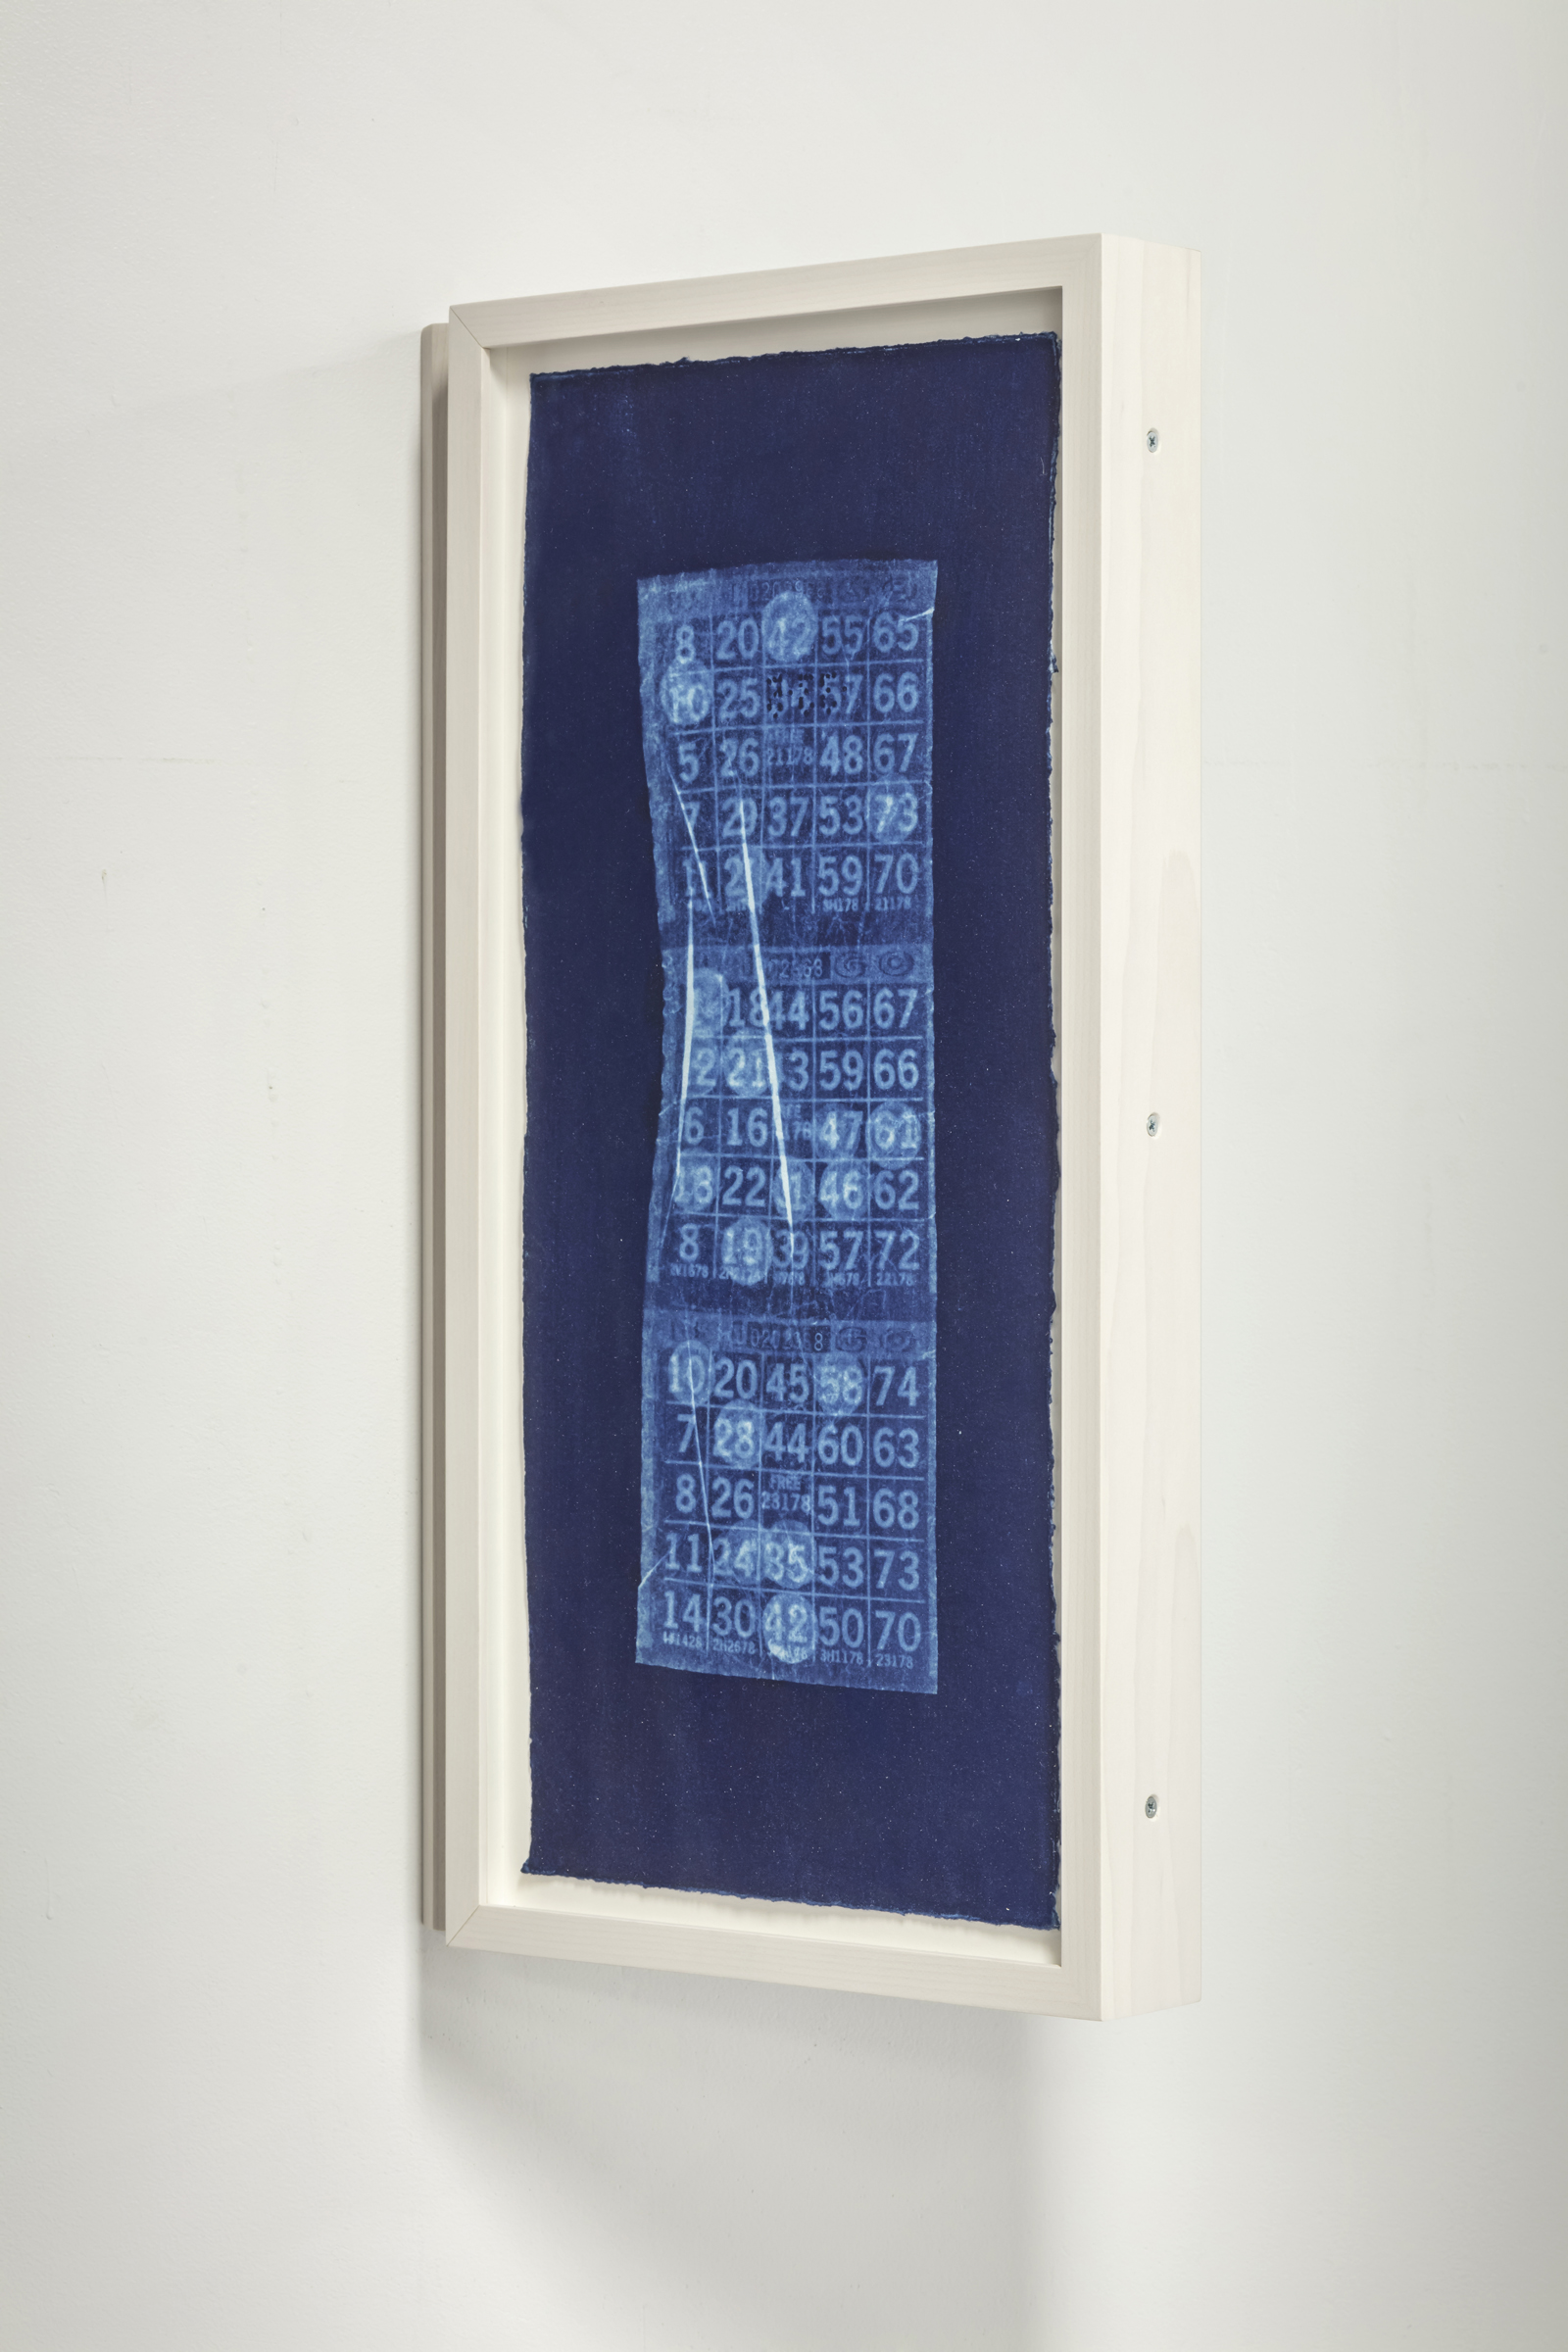  Lili Huston-Herterich  At Dusk Wet Ink Follows The Man / At Dusk Dry Men Follow The Moons , 2015 Cyanotype diptych, 7.25" x 16" (print size) Signed edition of 10 diptych      